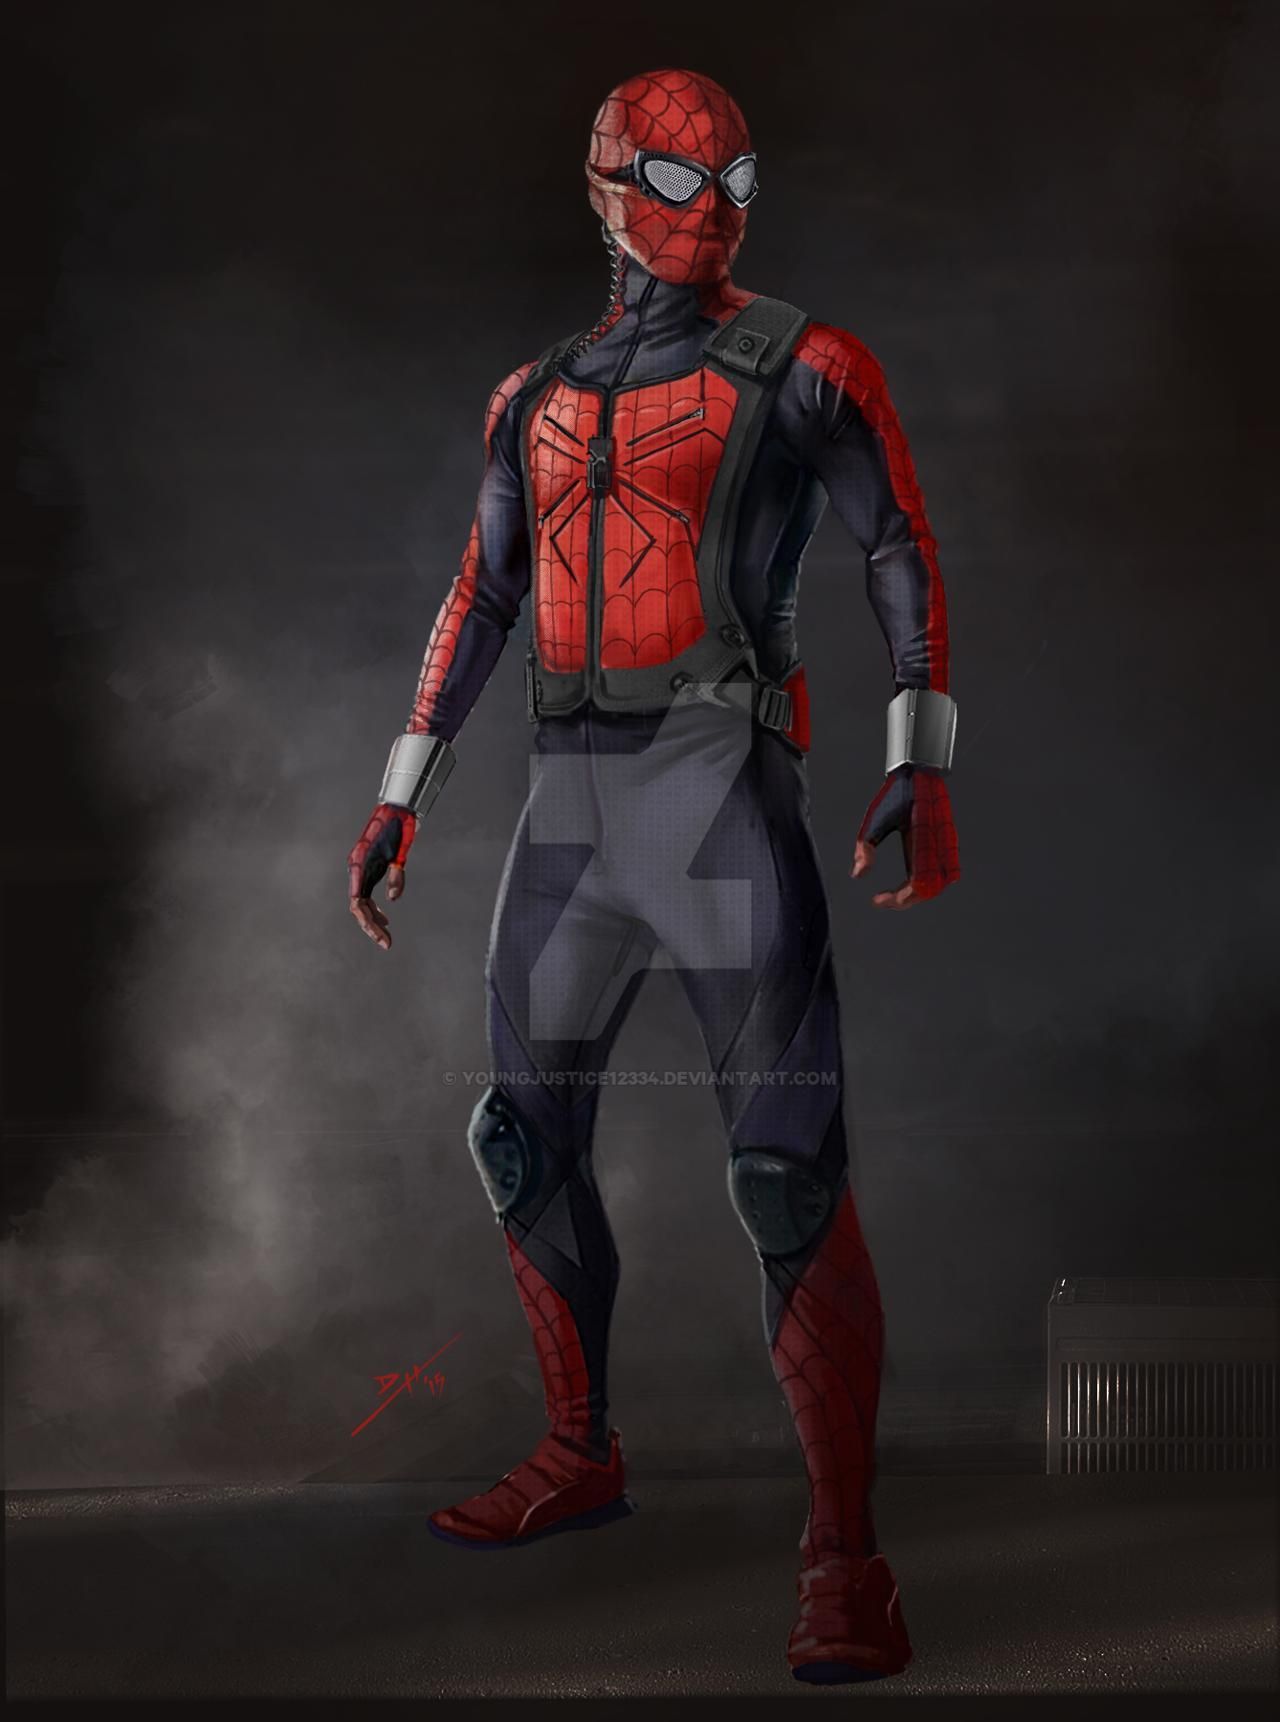 Alternate Homemade Spiderman Costume (MCU) by YoungJustice12334 on DeviantArt